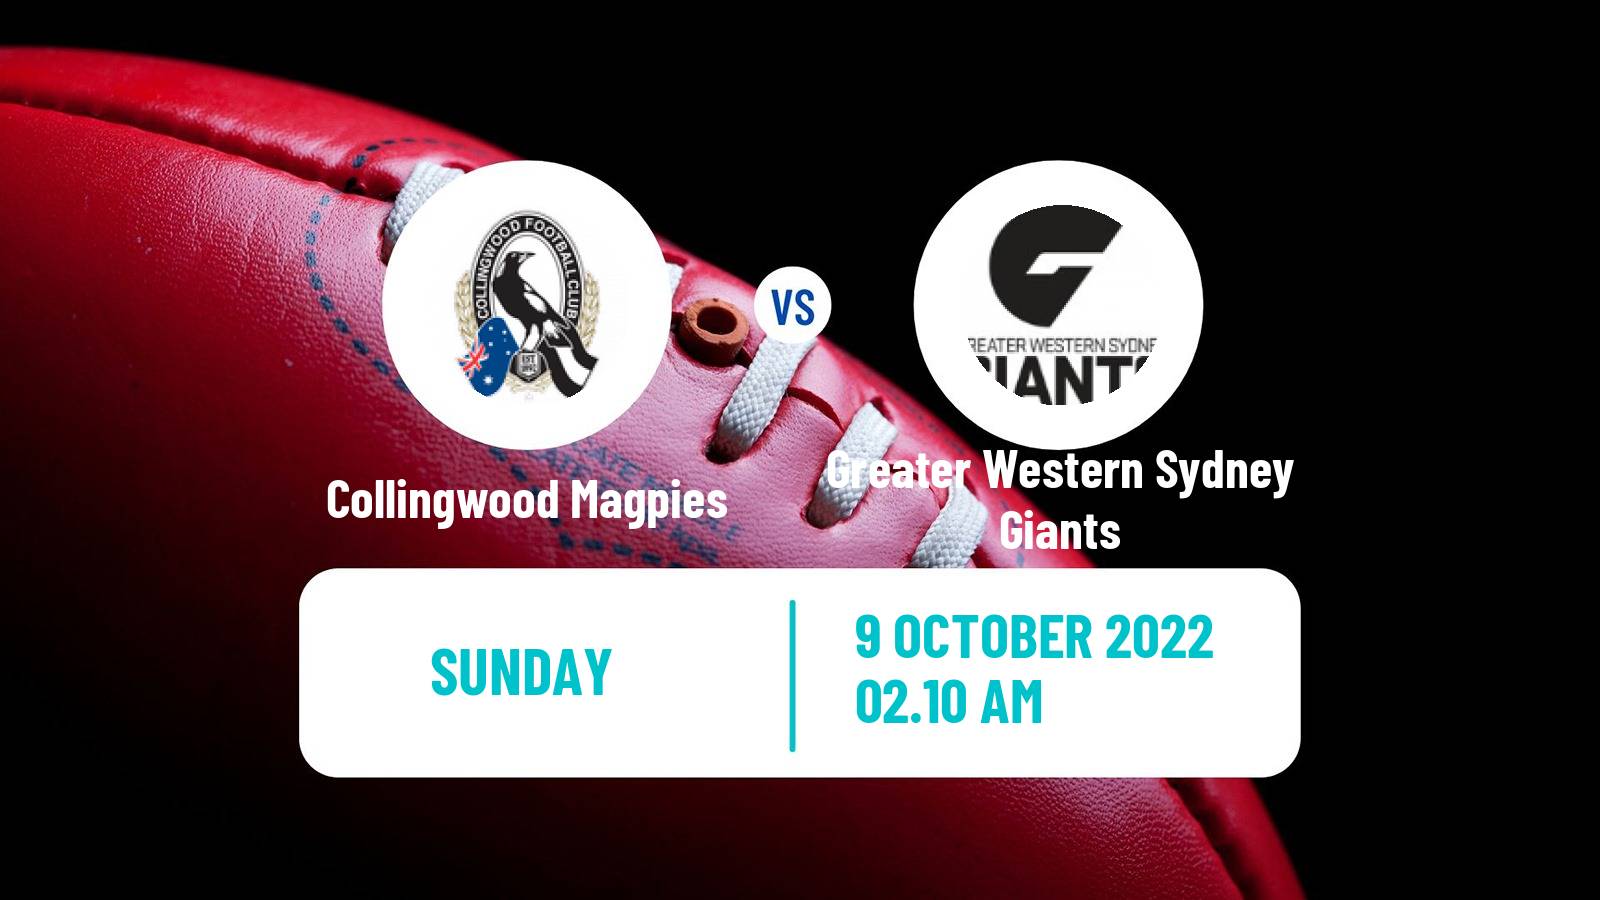 Aussie rules AFL Women Collingwood Magpies - Greater Western Sydney Giants